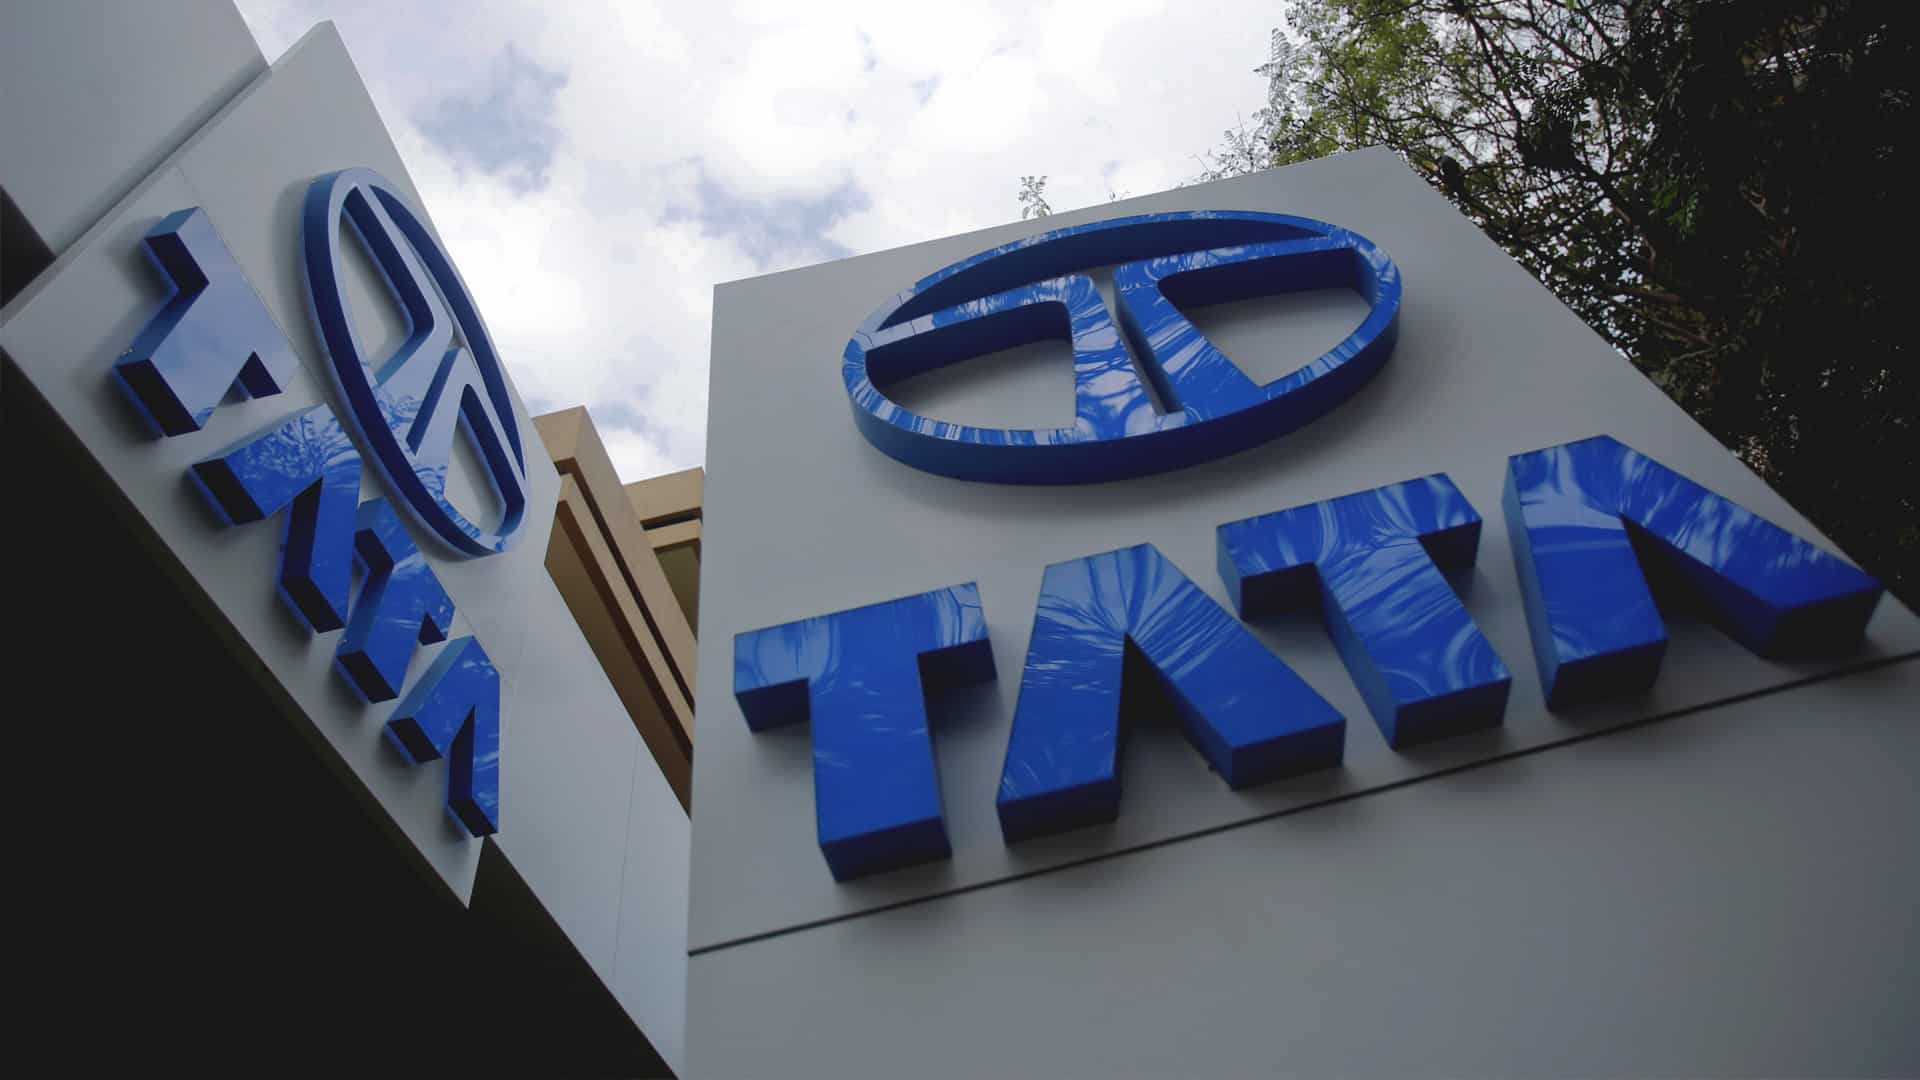 Tata Motors to hike passenger vehicle prices from Feb 1